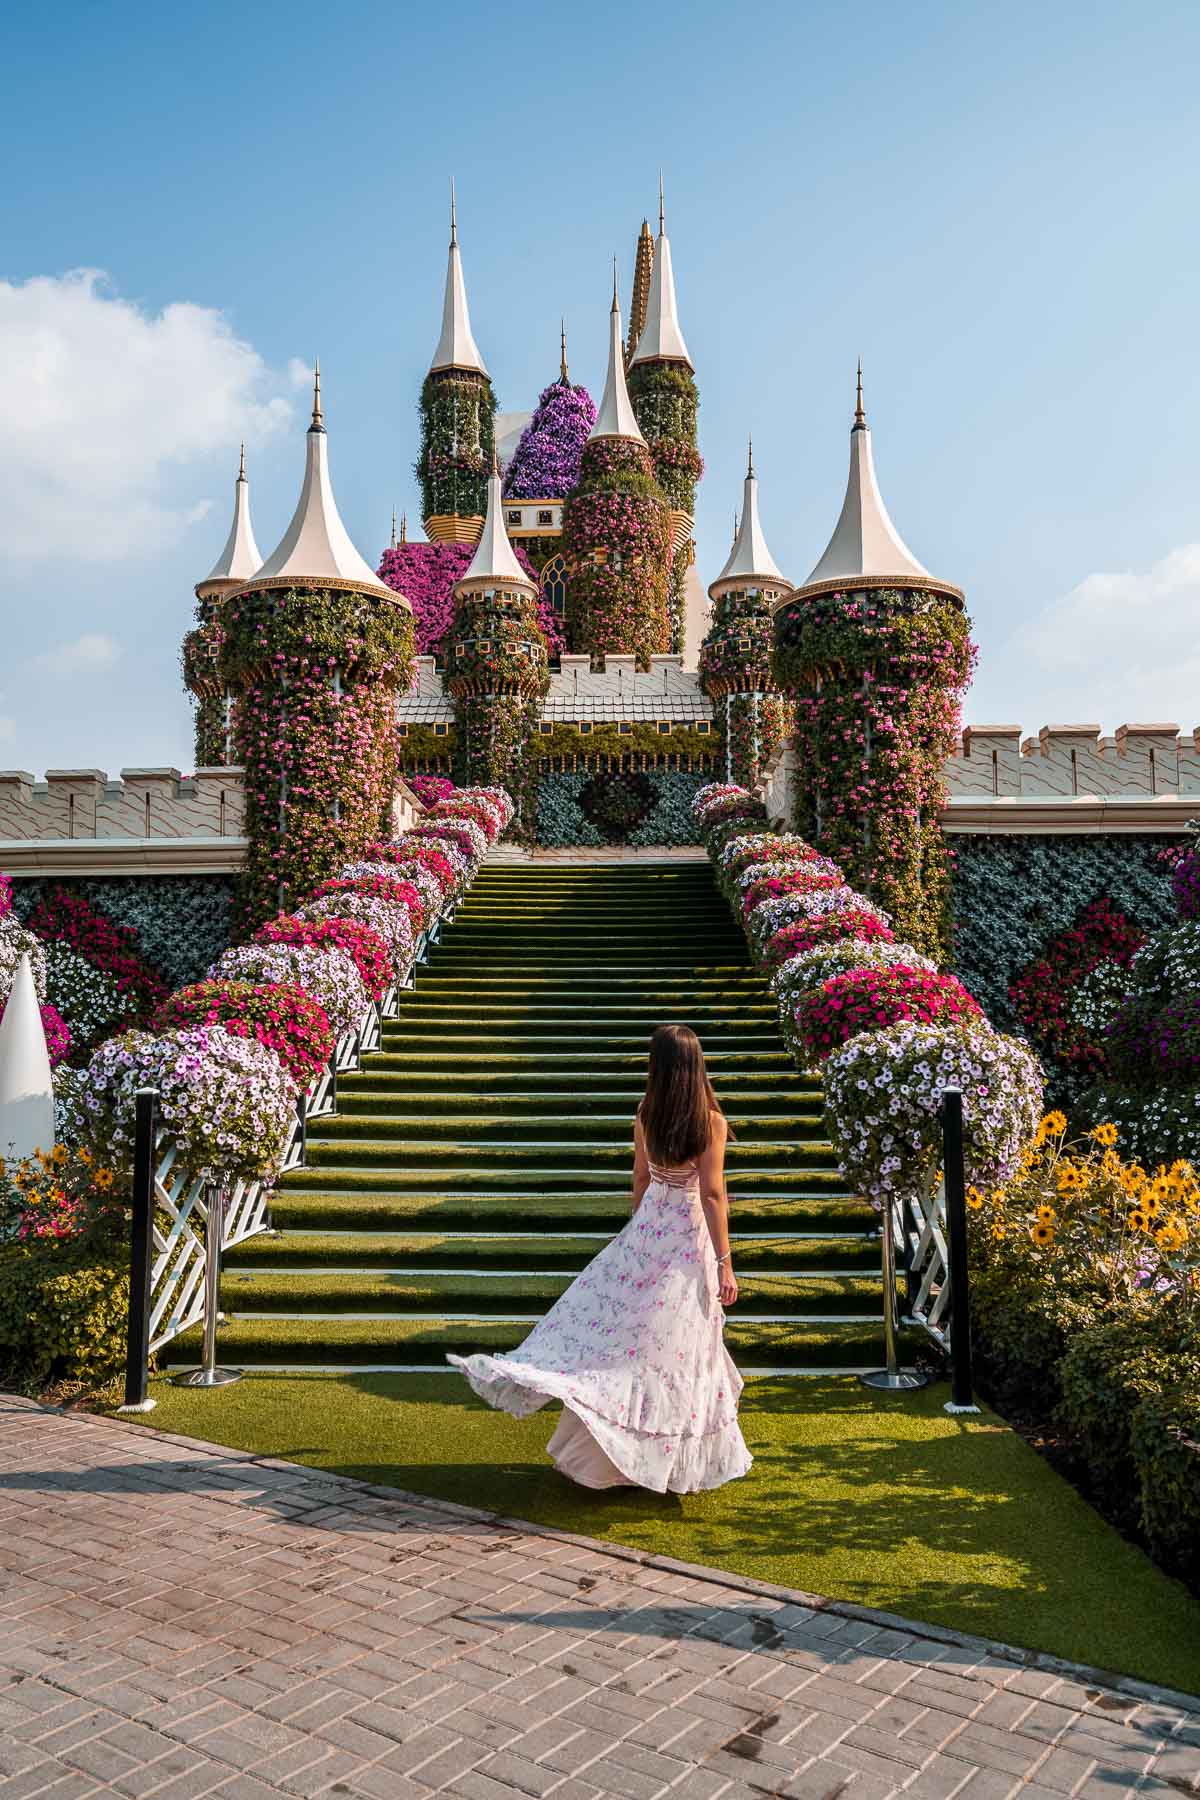 Girl in pink floral dress standing in front of a castle made of flowers in the Dubai MIracle Garden